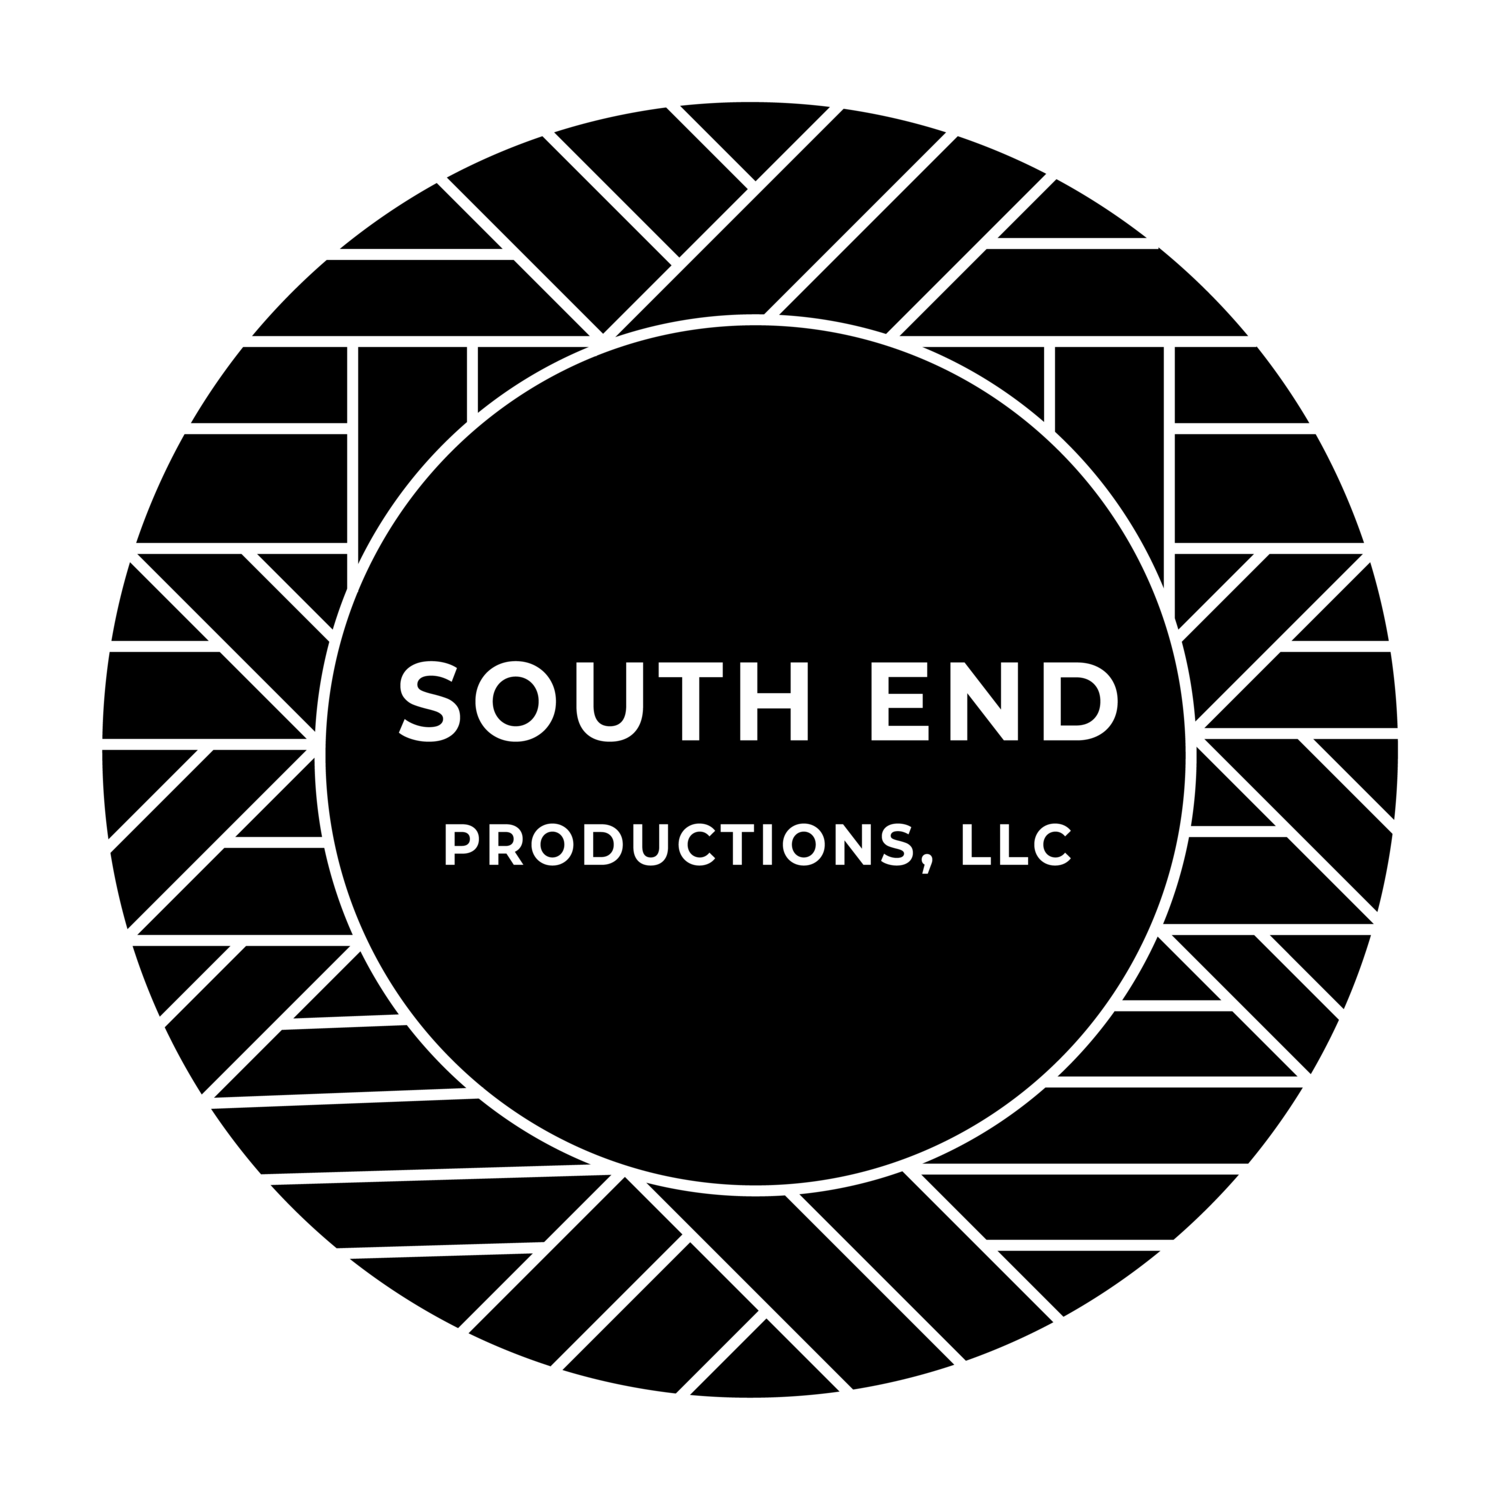 South End Productions, LLC